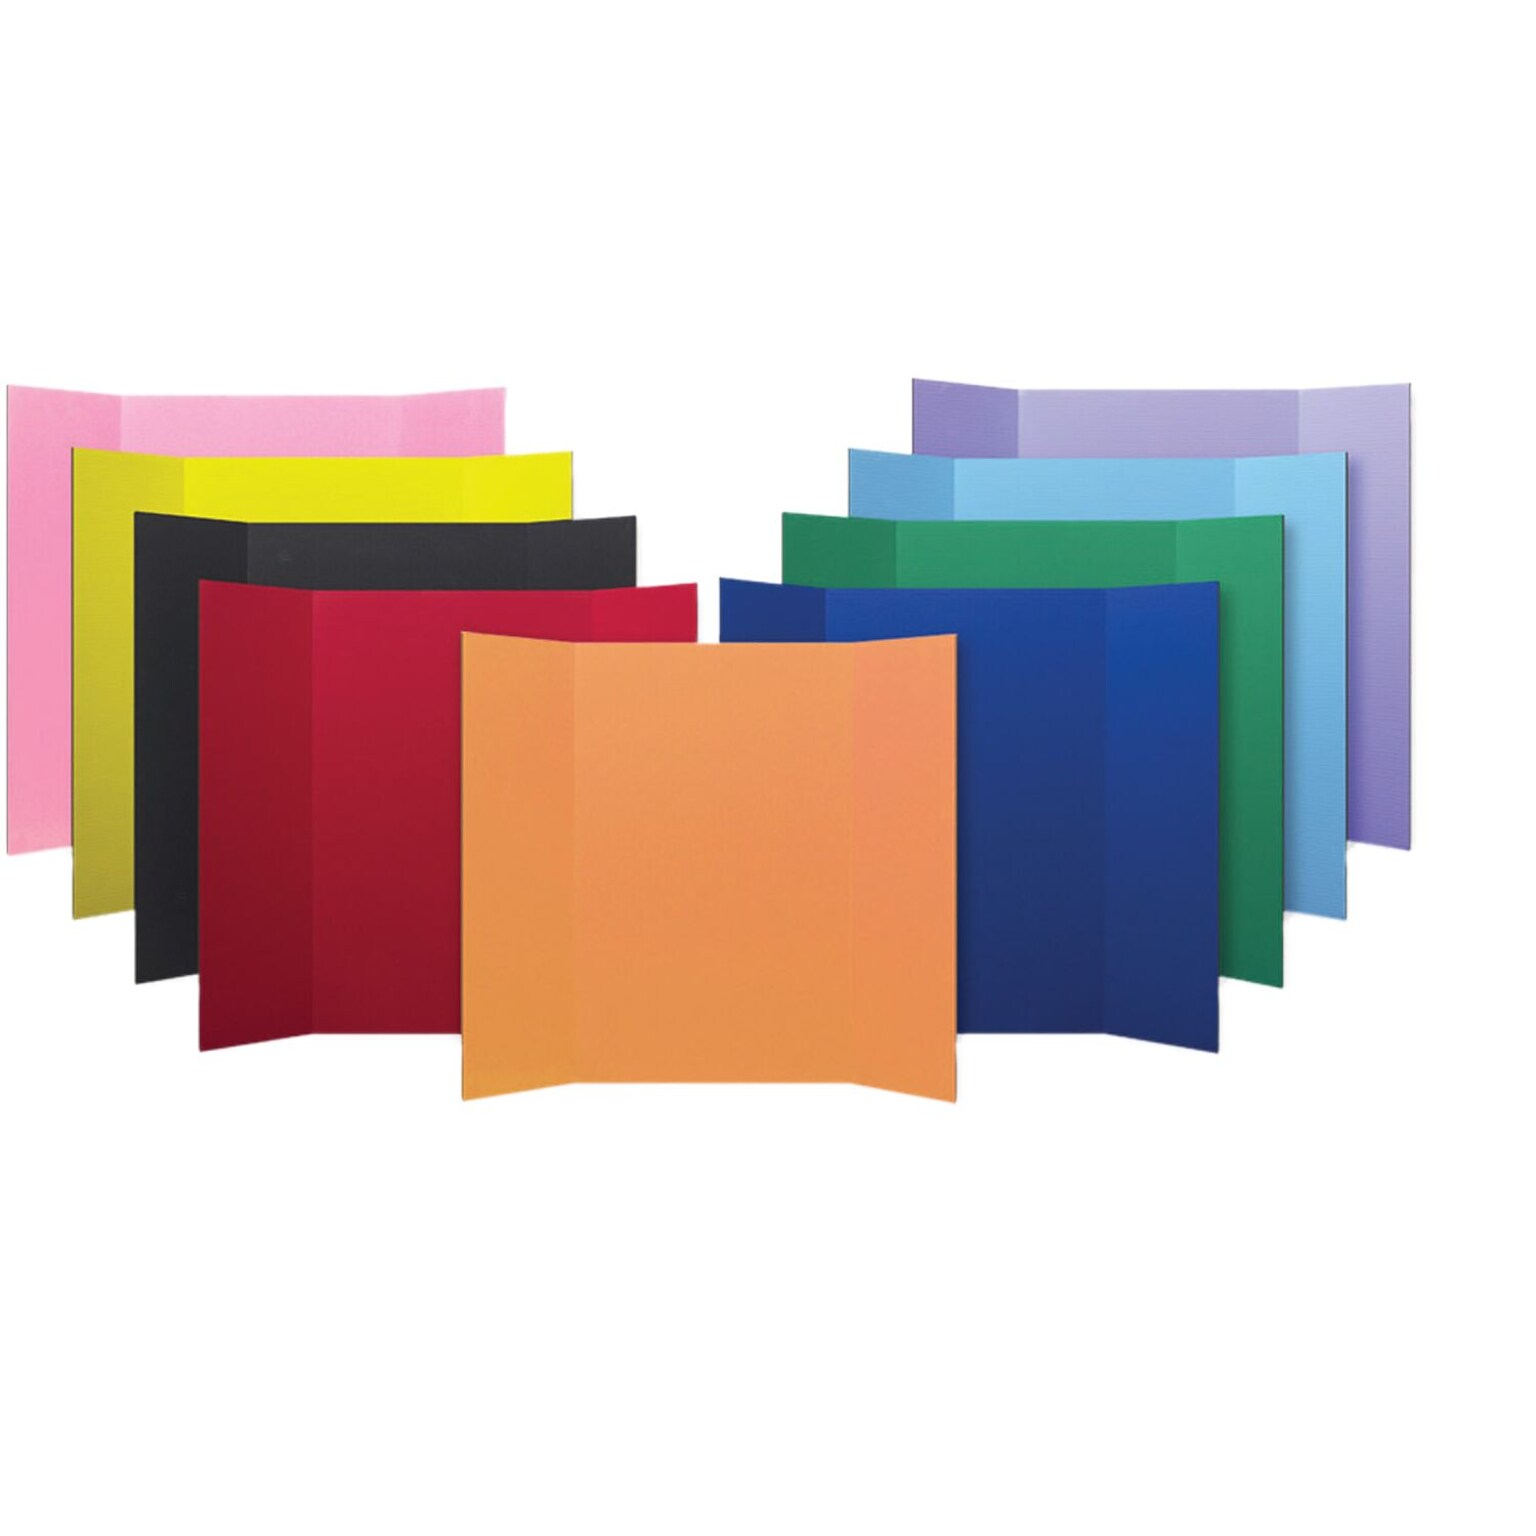 Flipside Corrugated Project Board, Assorted Colors, 36 x 48, 24/Pack (30045)